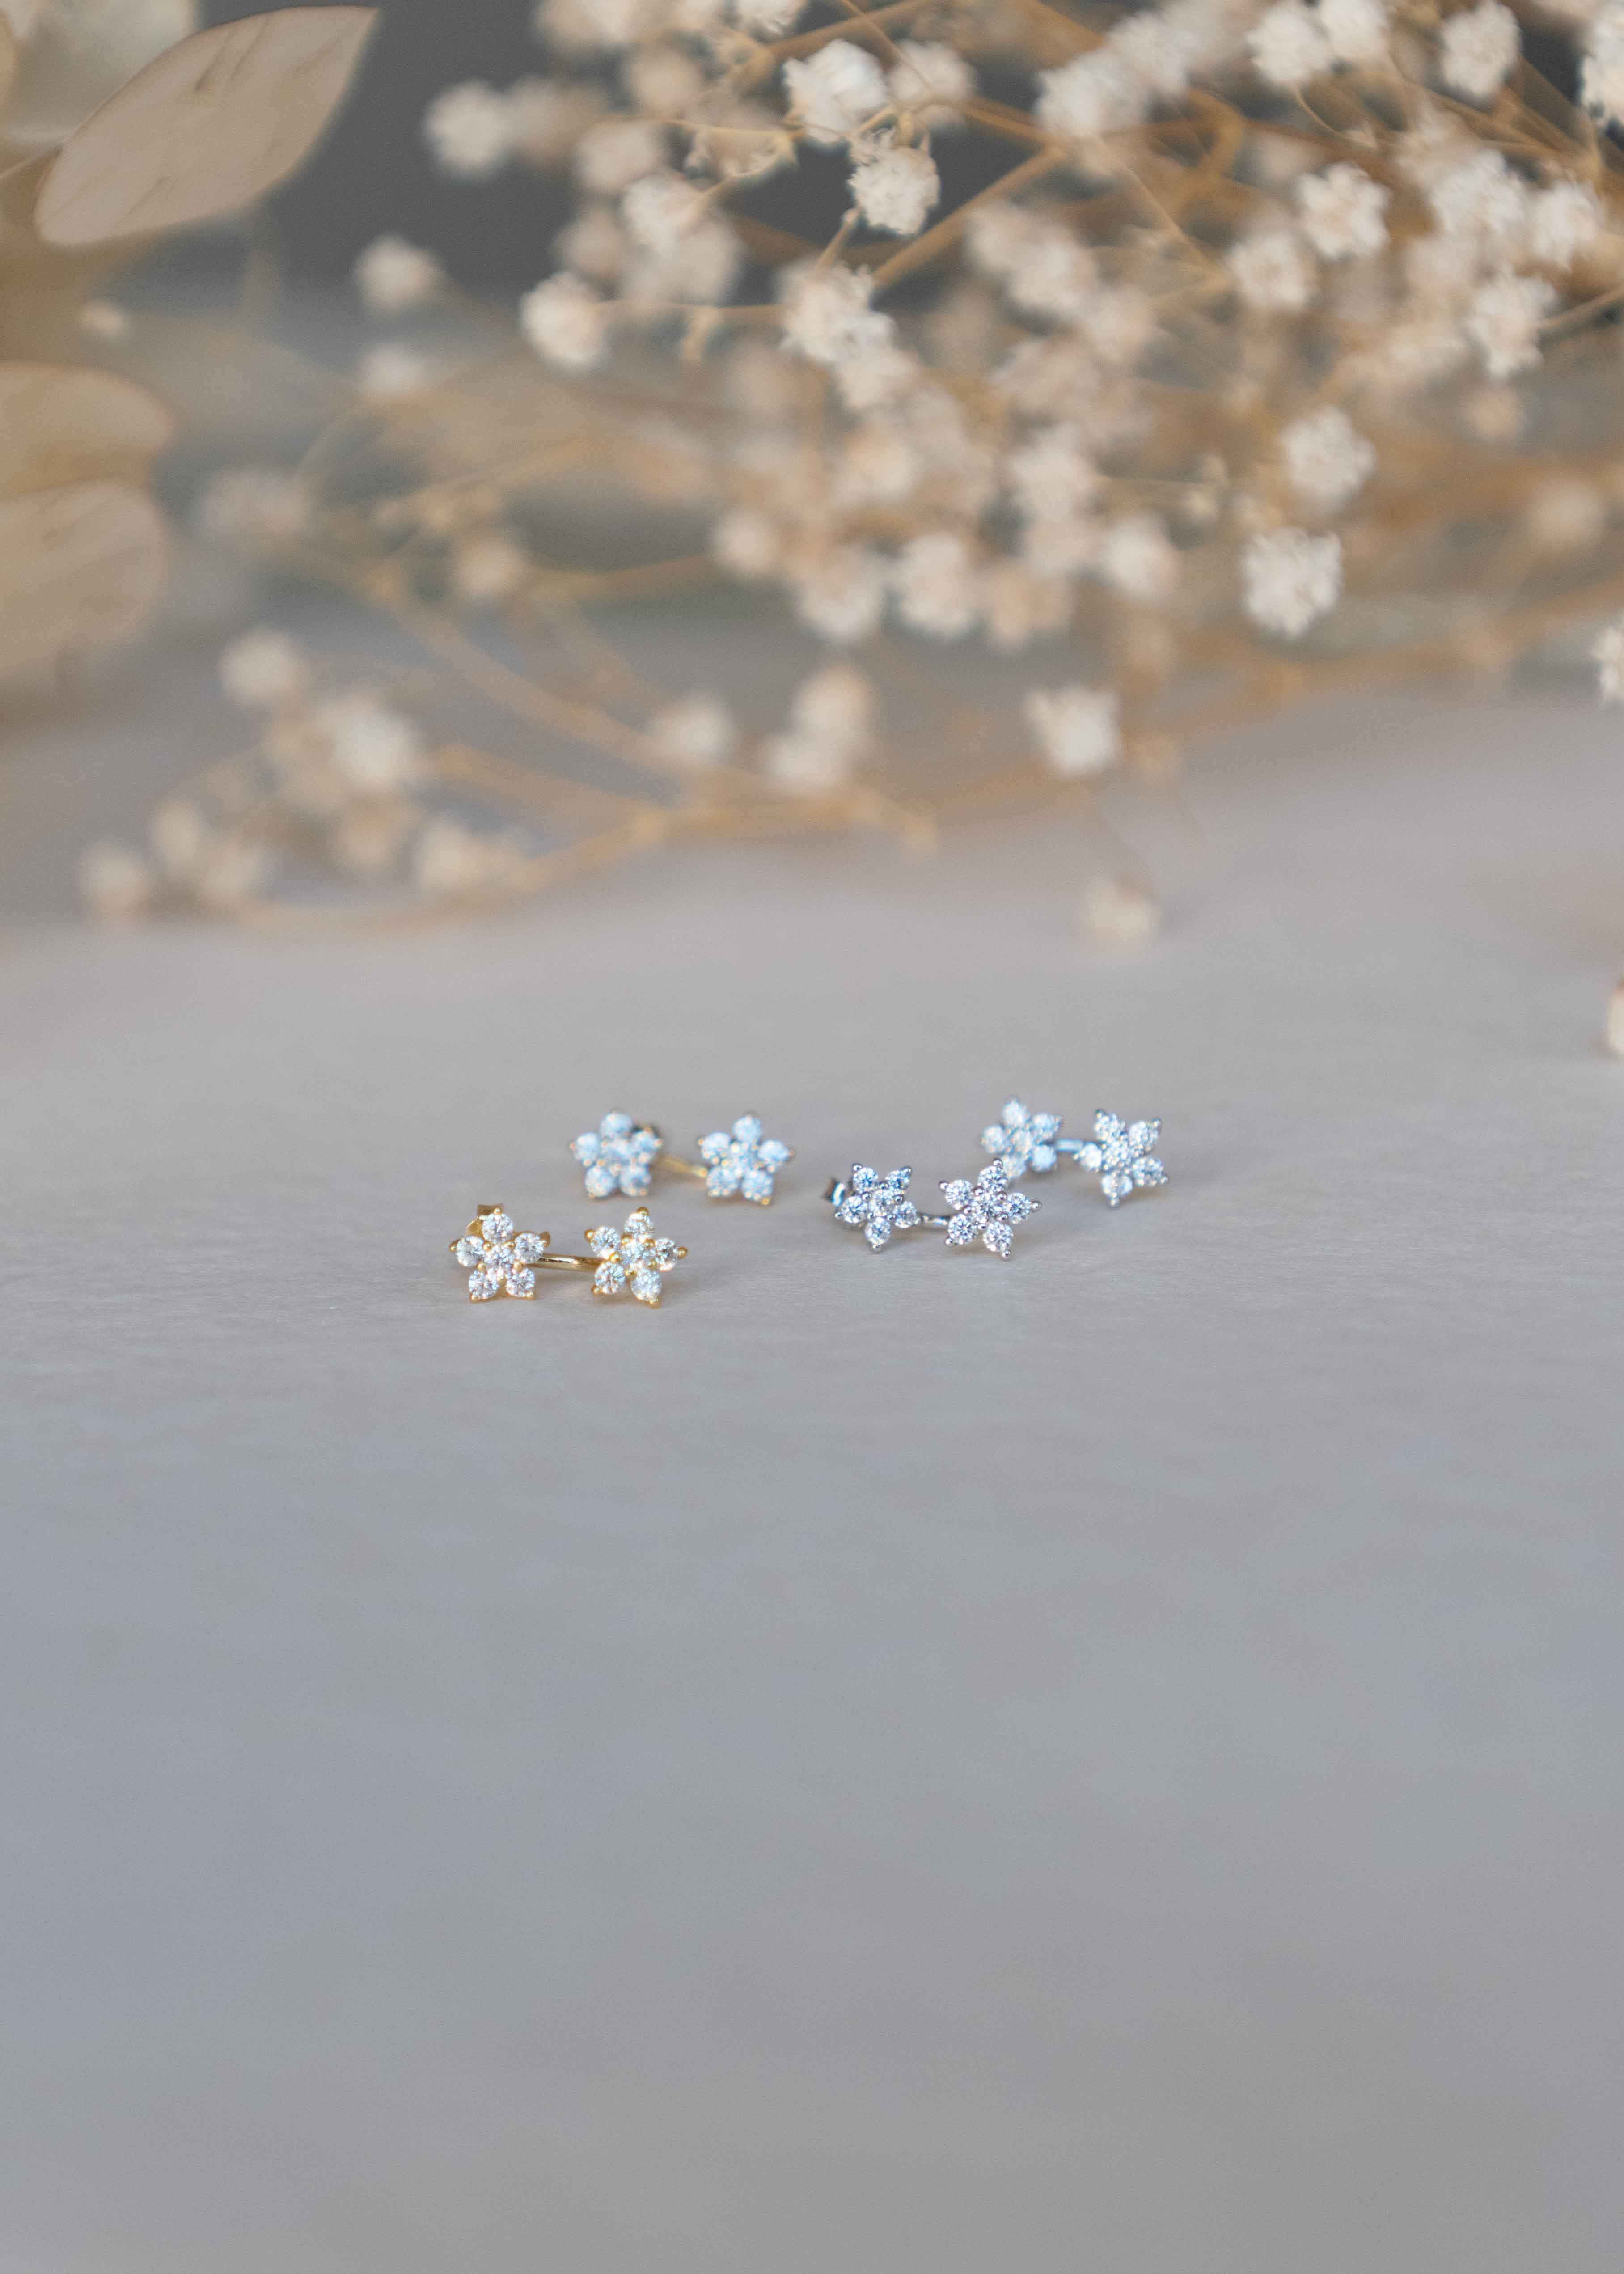 Flower Jacket Earrings for Spring look, Floral Earrings, Spring Earrings, Summer Earrings, Dainty Earrings for girls, best gifts